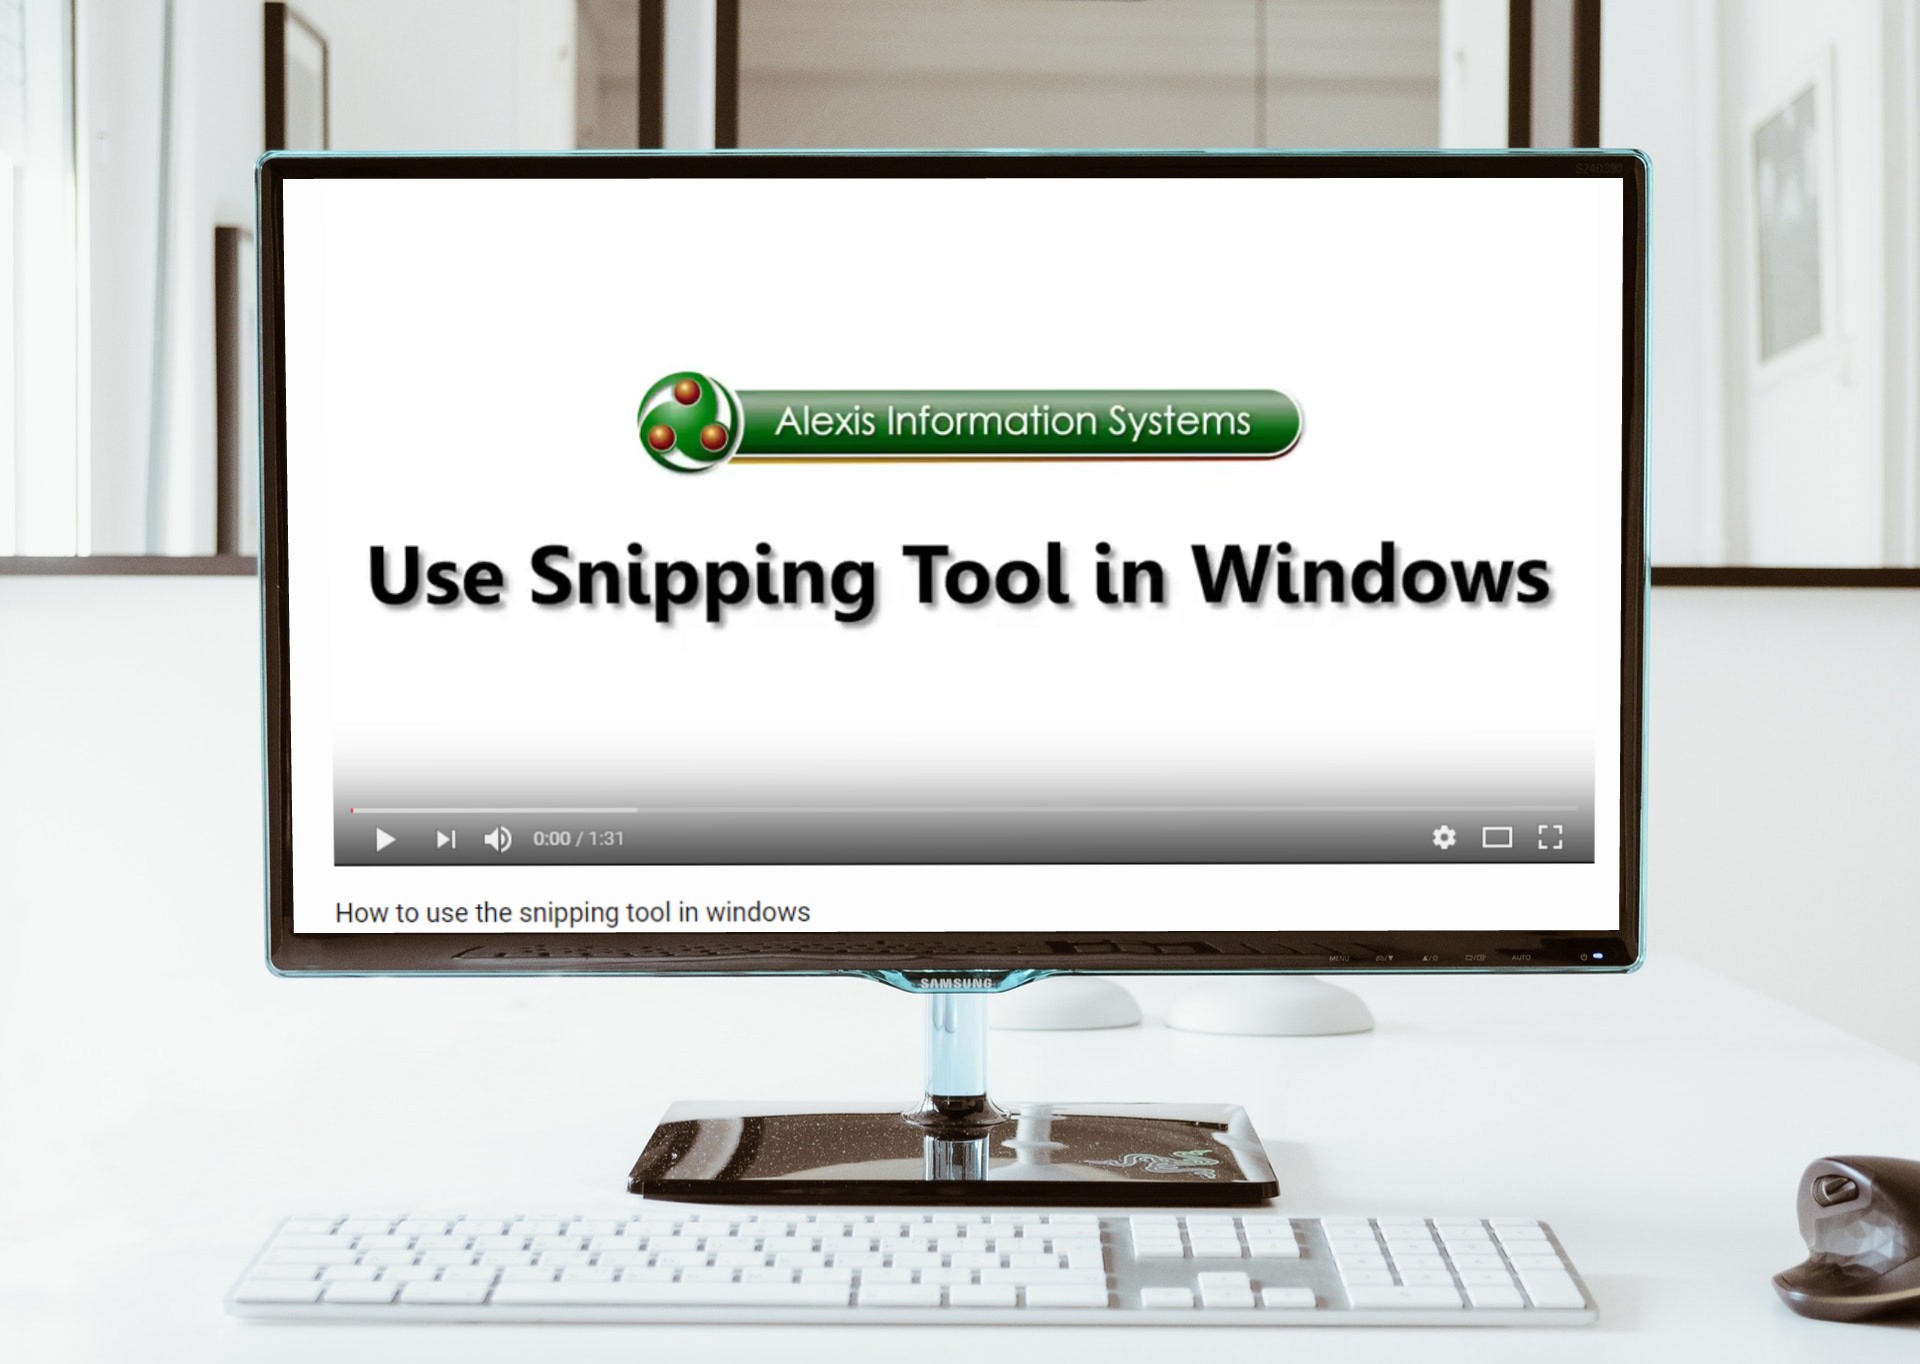 microsoft snipping tool windows 7 download free